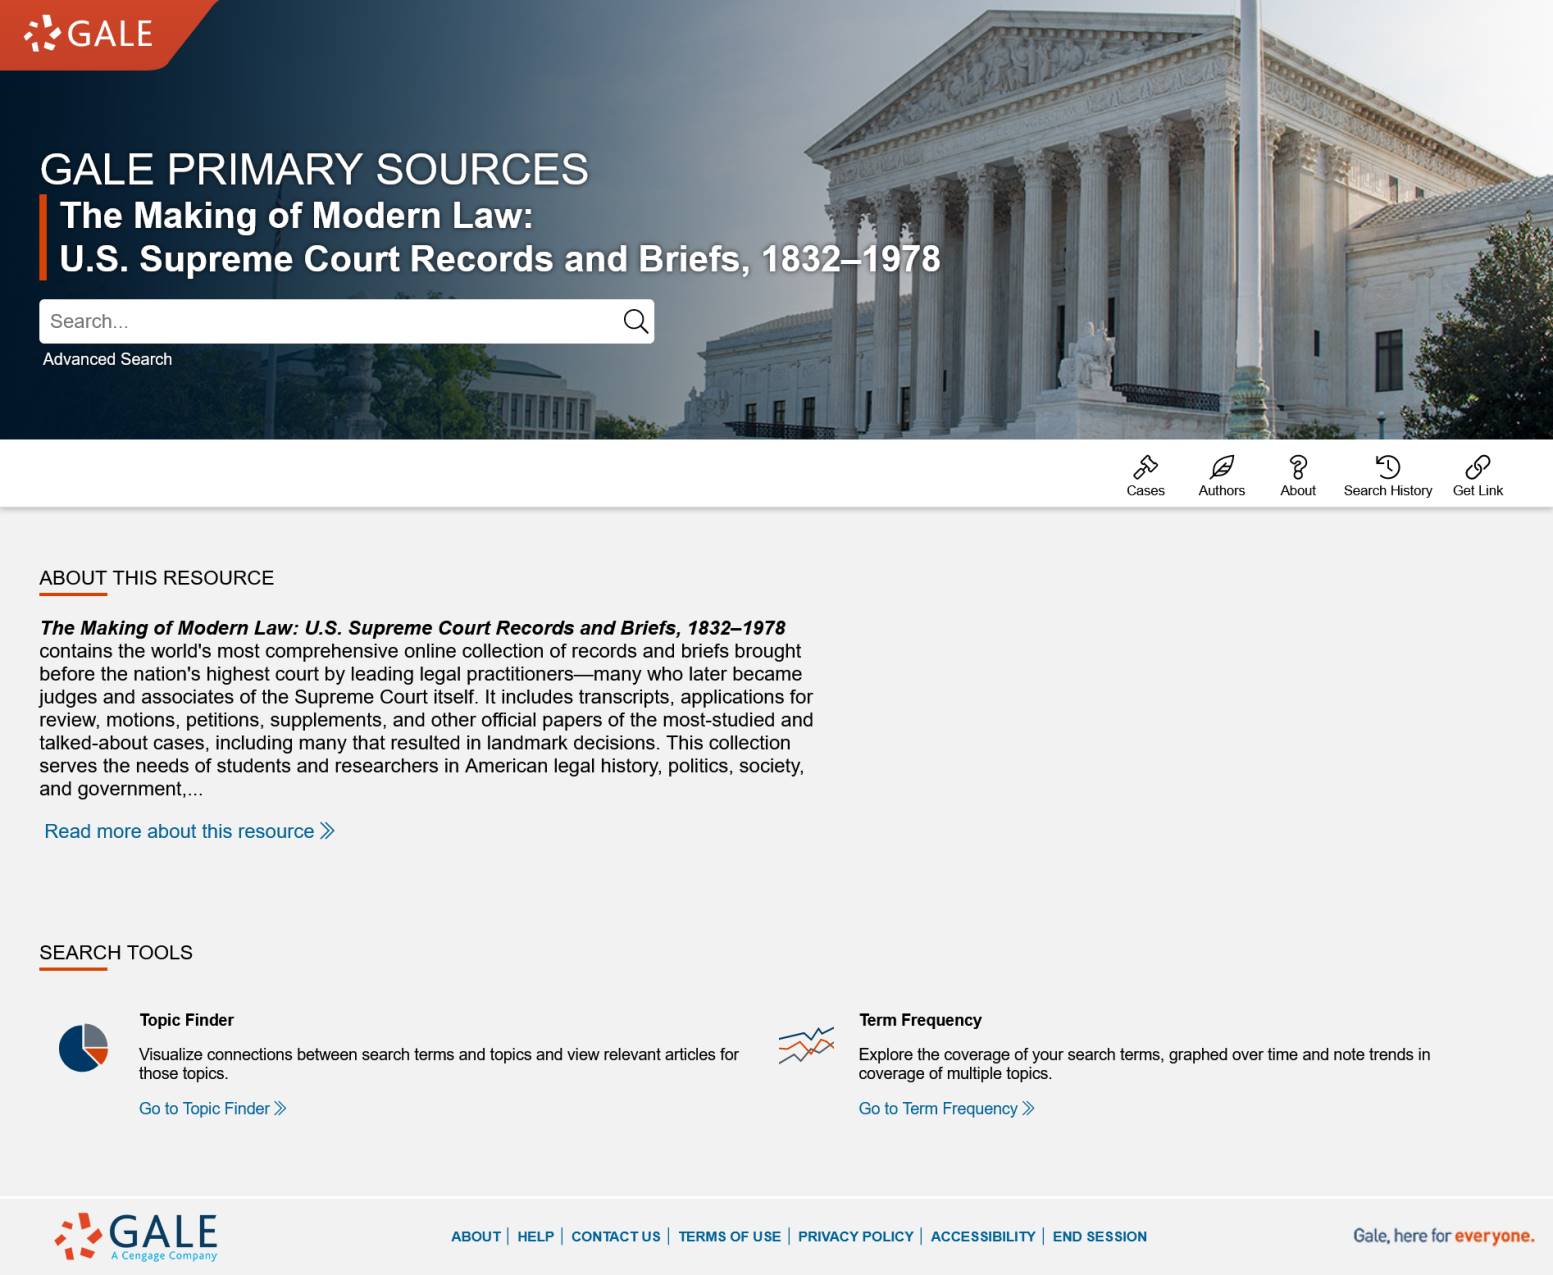 The Making of Modern Law: U.S. Supreme Court Records and Briefs, 1832-1978 のホーム画面